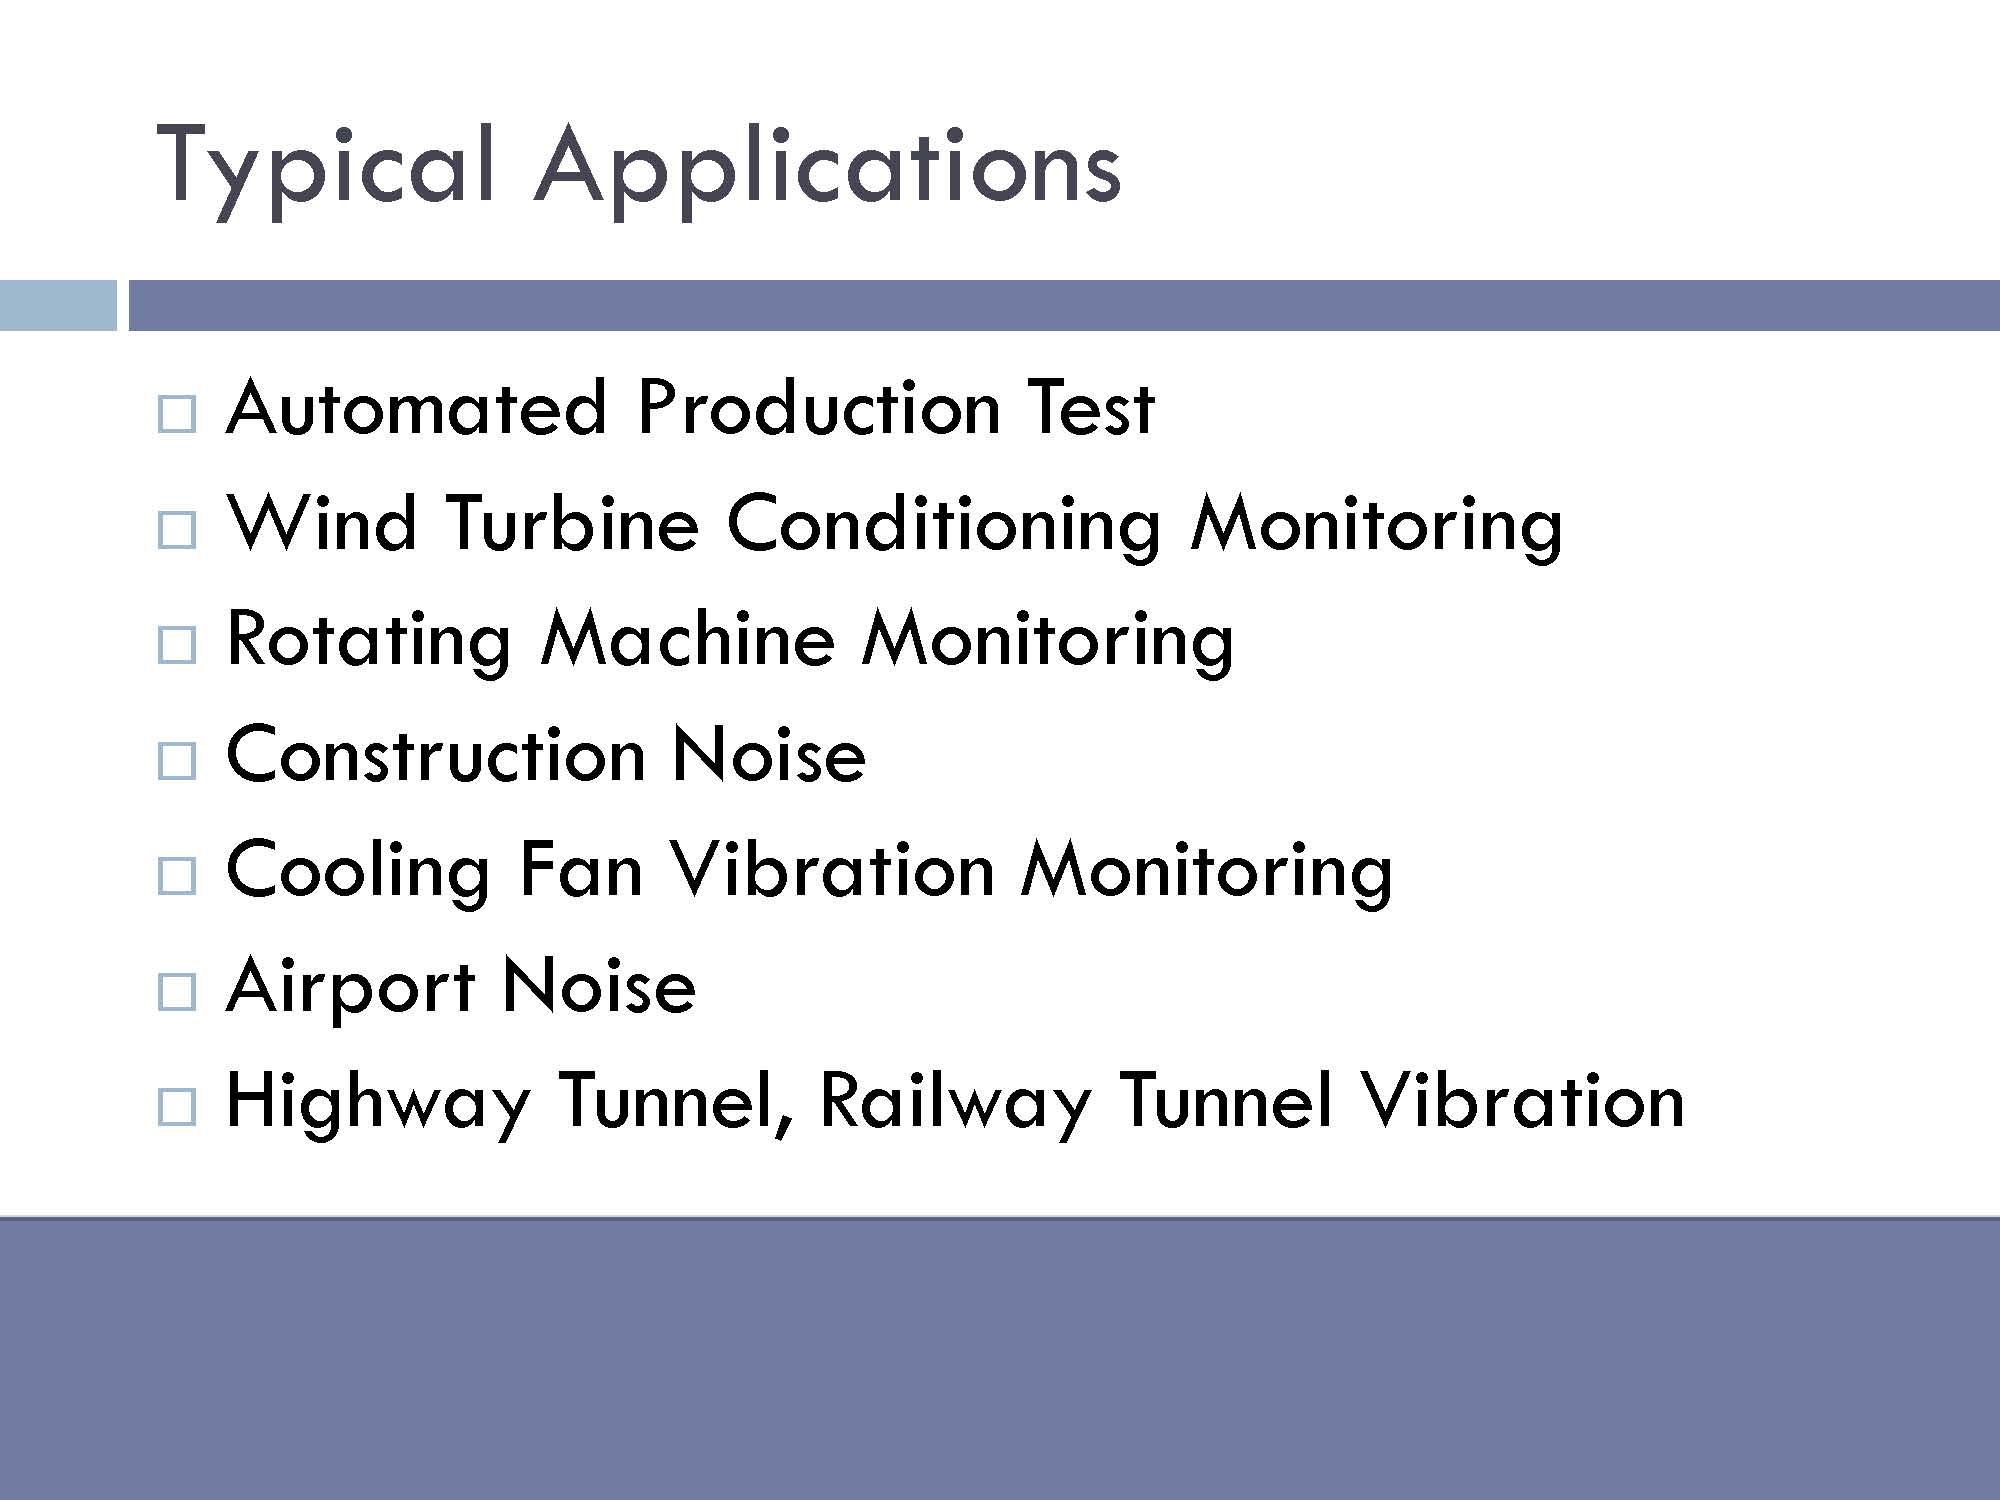   Typical Applications: Automated production test, wind turbine conditioning monitoring, rotating machine monitoring, construction noise, cooling fan vibration monitoring, airport noise, highway tunnel, railway tunnel vibration.  